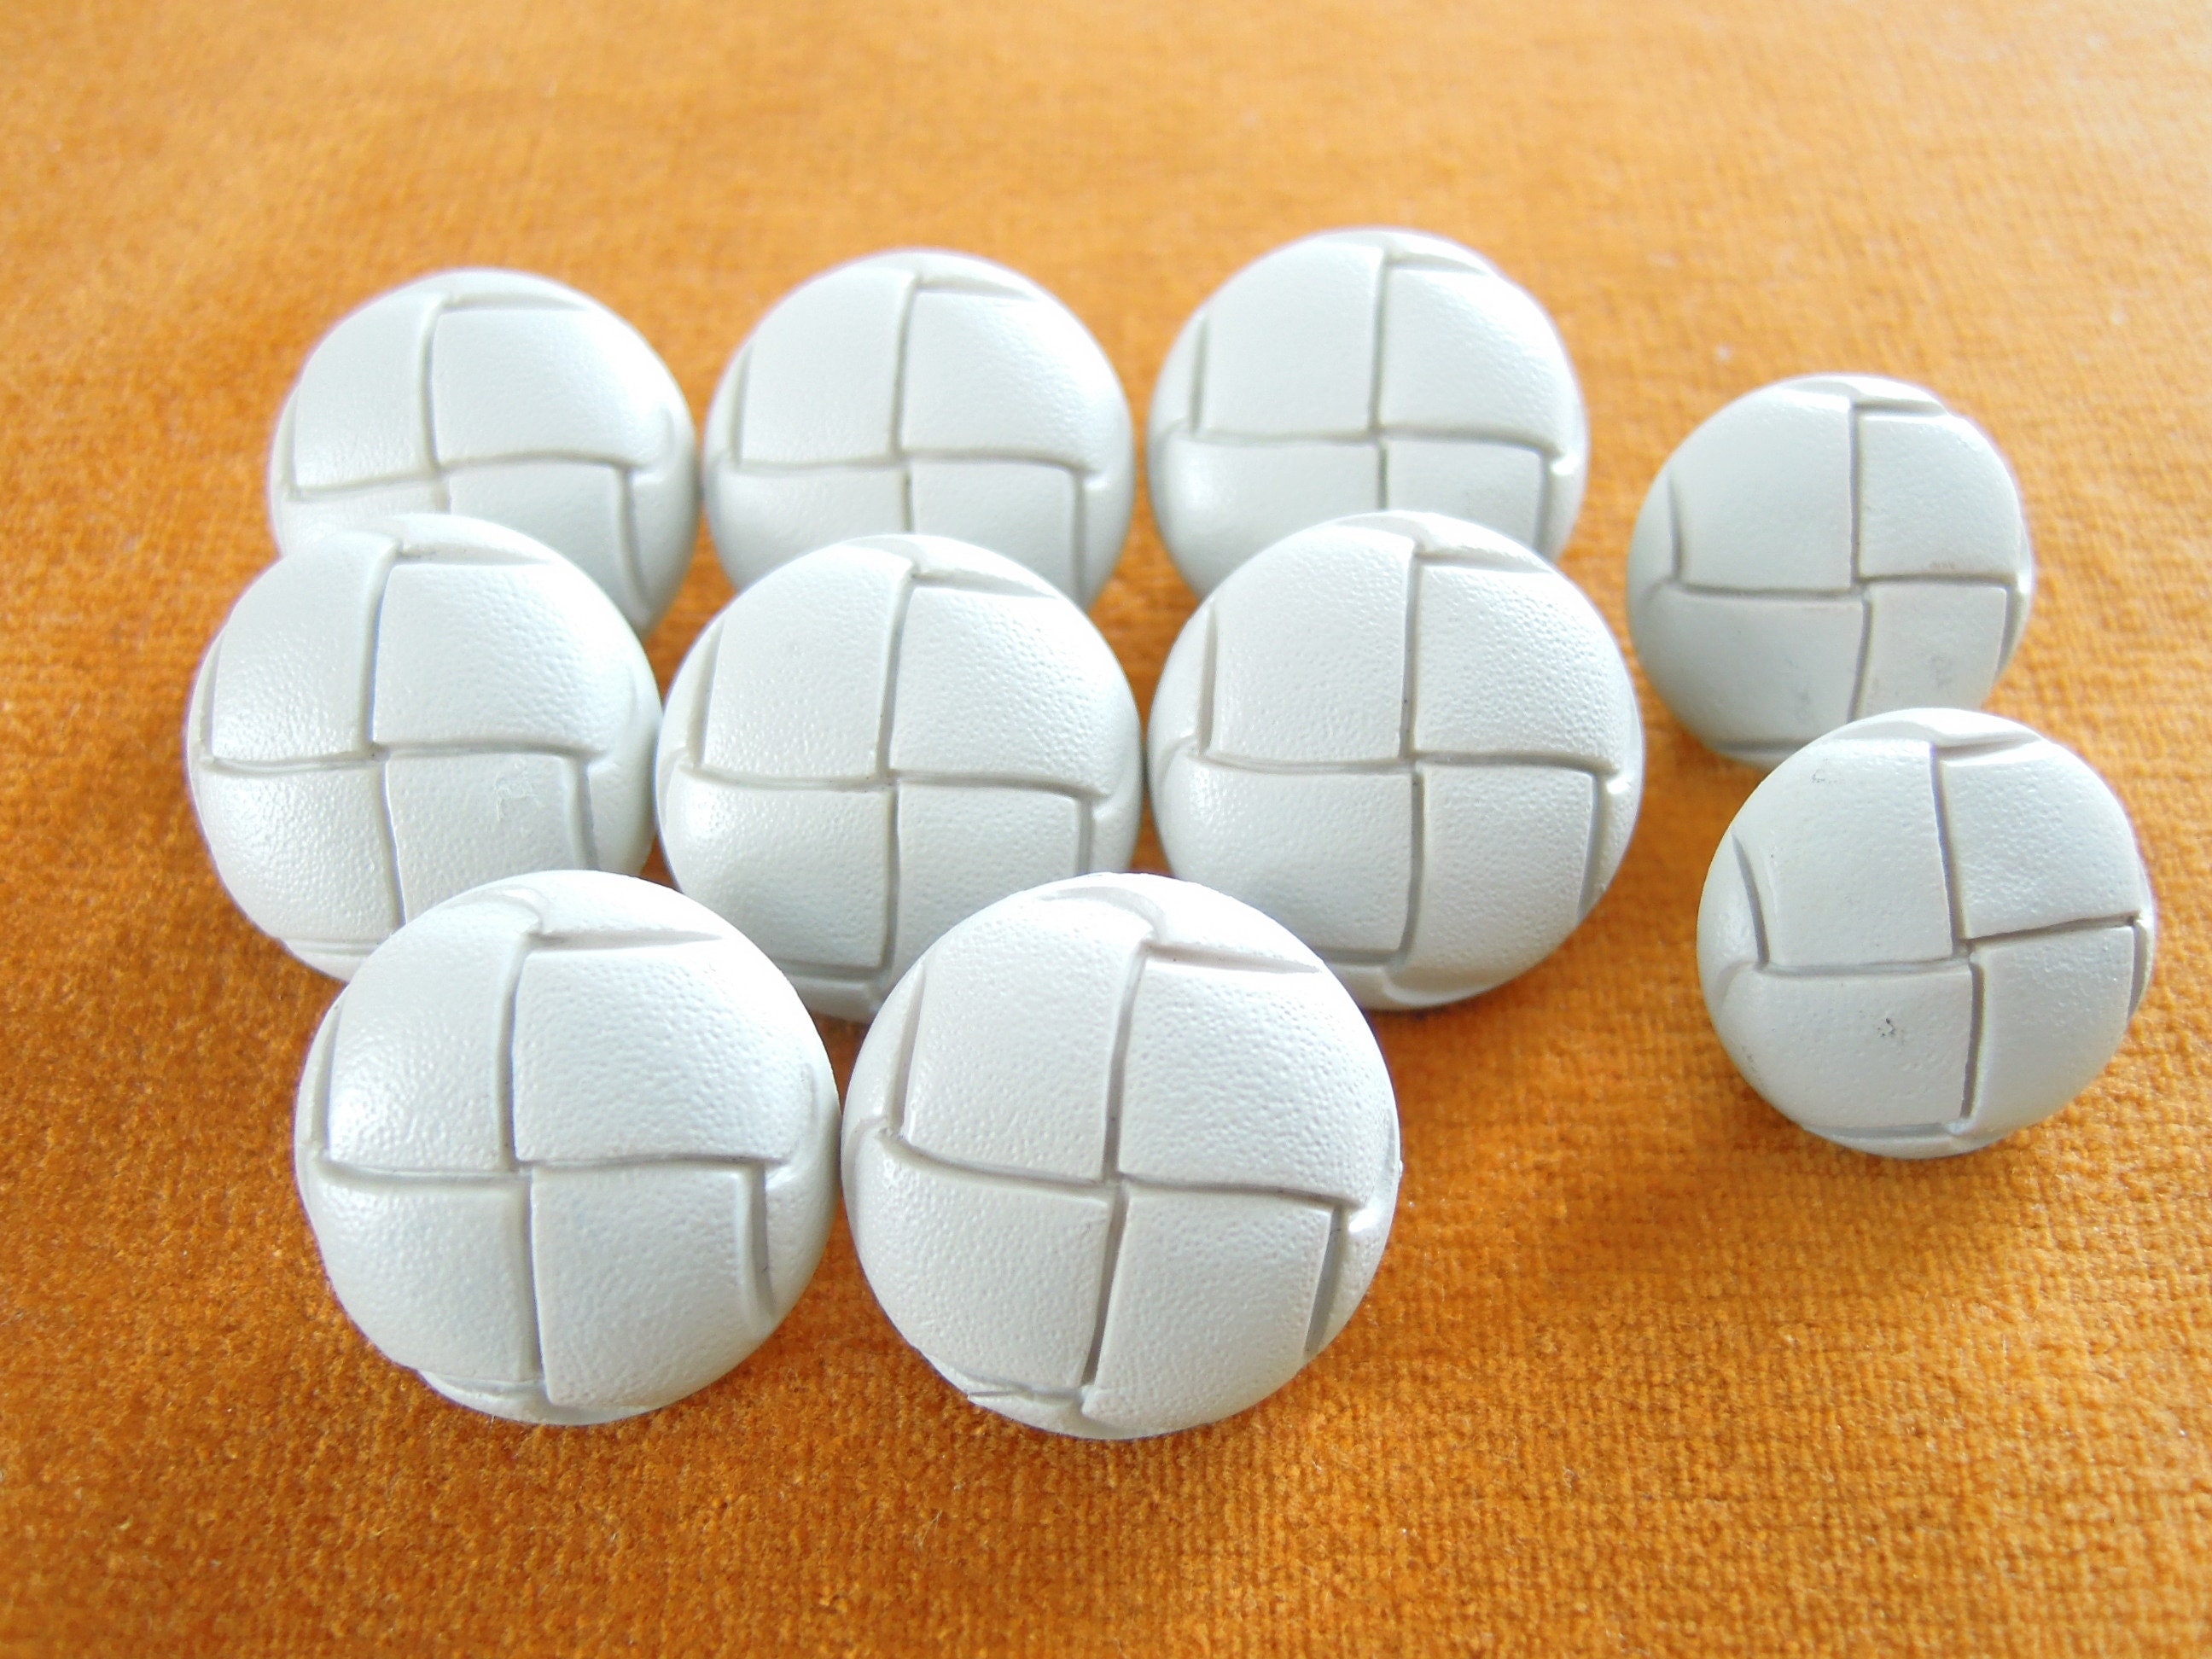 Set of 10 Vintage Retro Grey Tweed Leather Look Plastic Football Buttons #E306